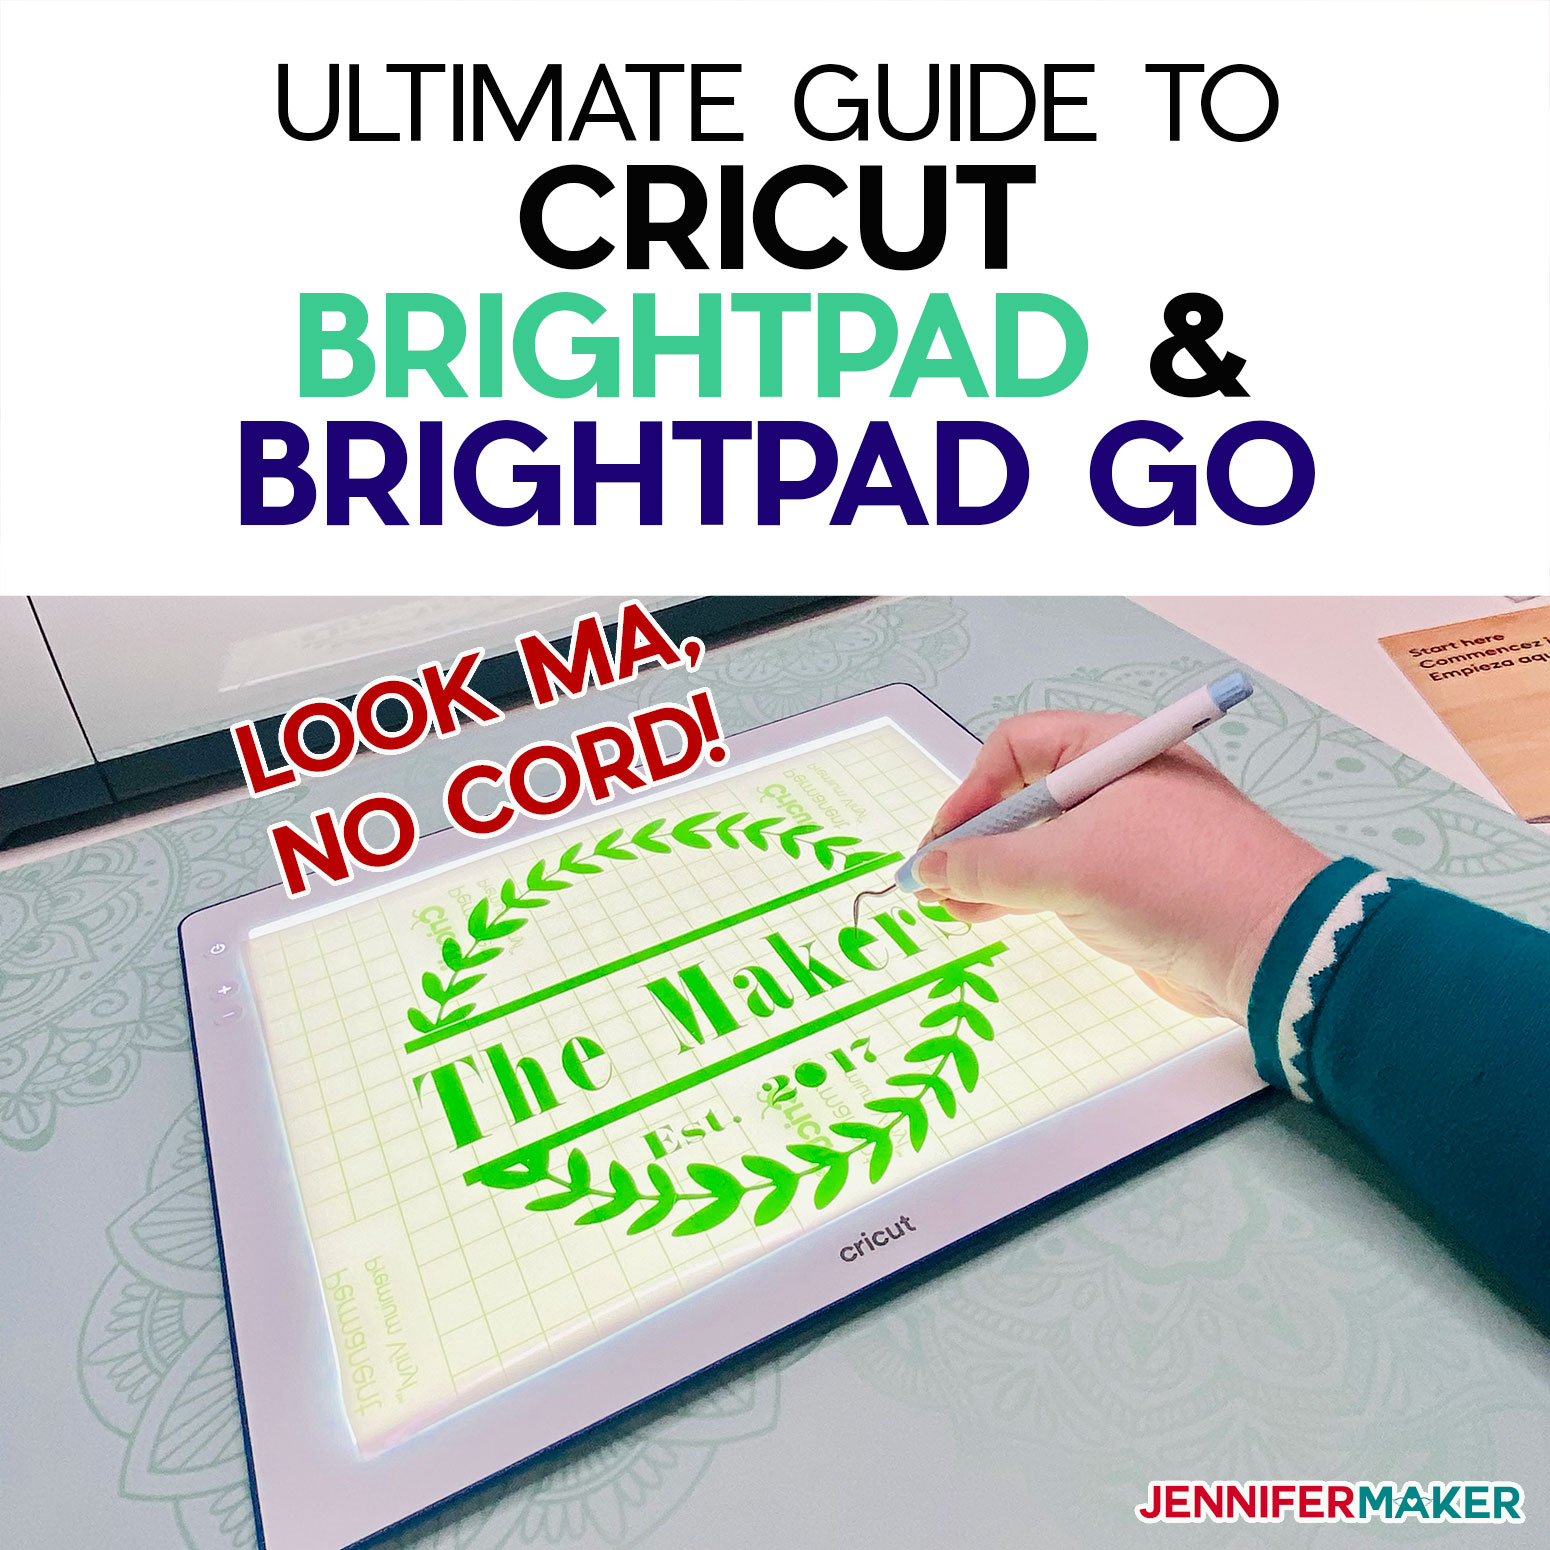 Cricut BrightPad & BrightPad Go Ultimate Guide to easier weeding and tracing with Cricut's light pad